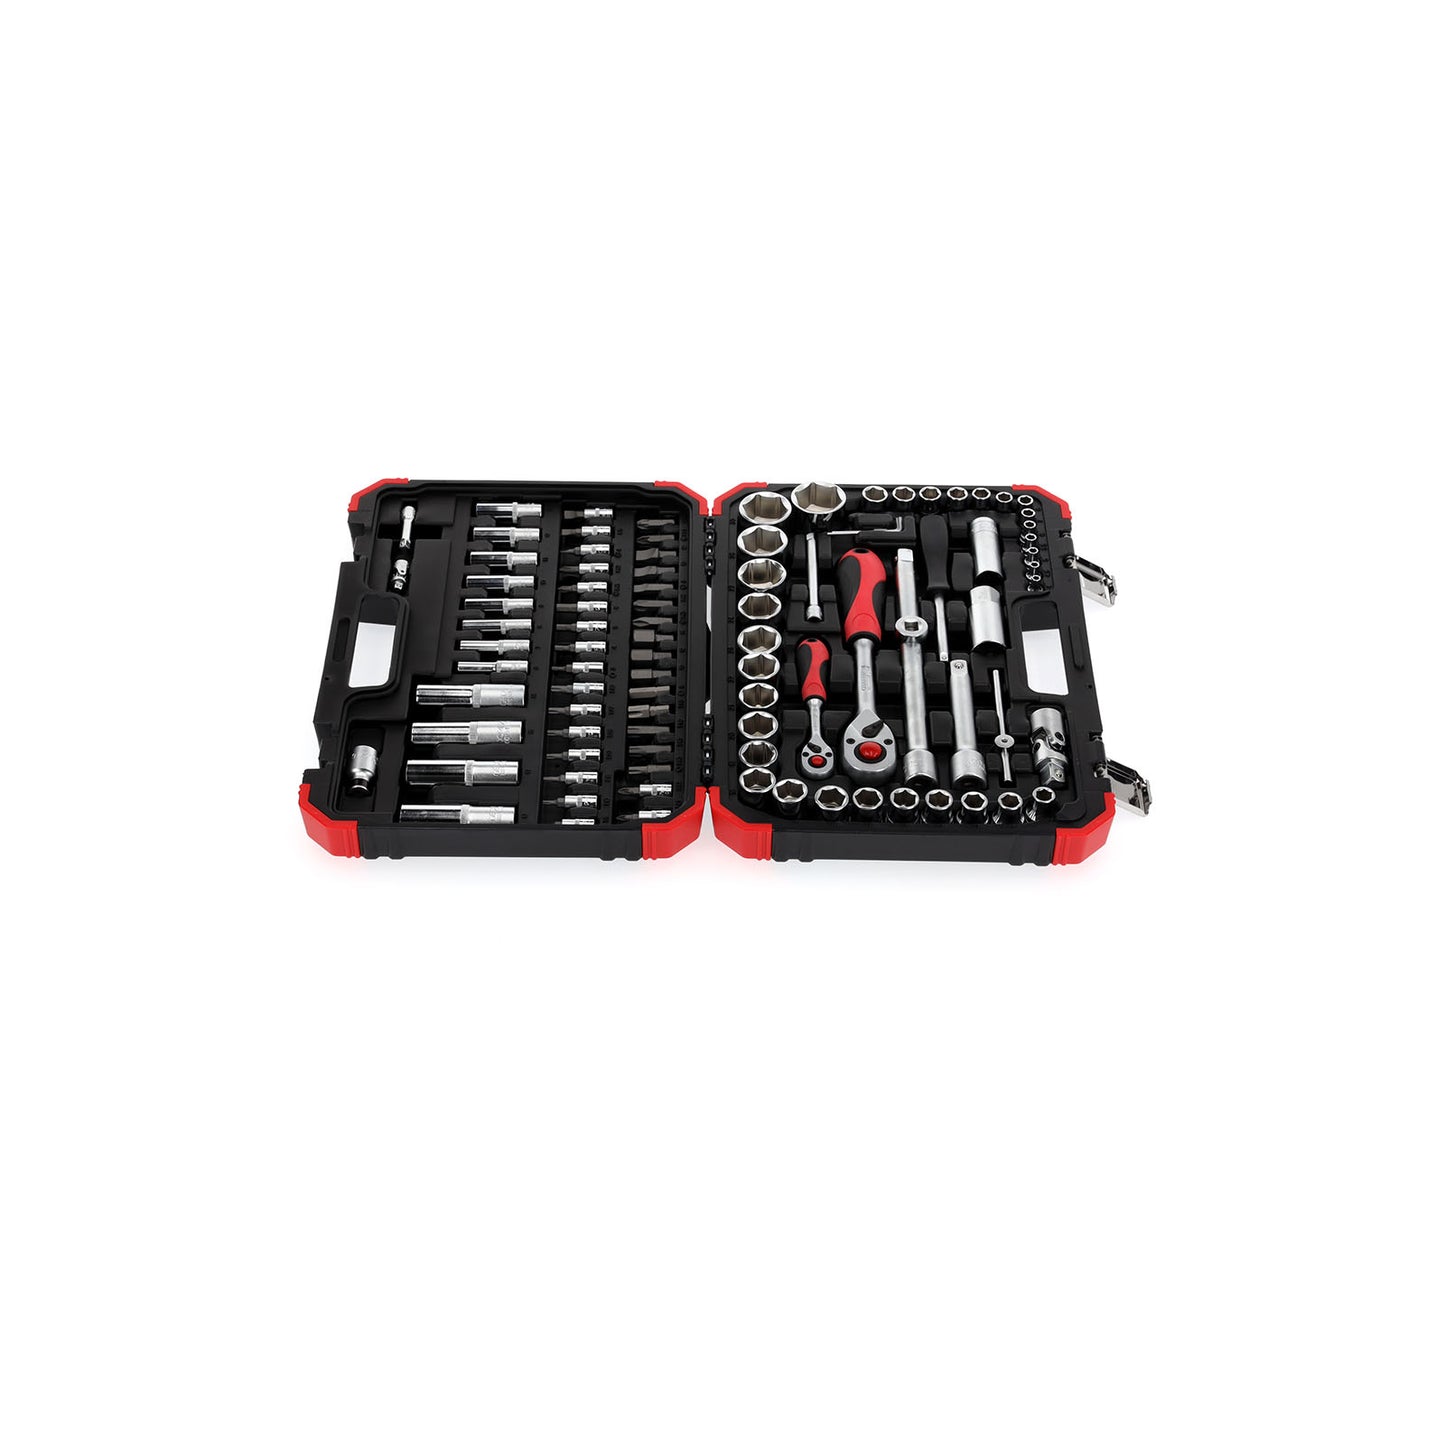 GEDORE red R46003094 - 1/4"+1/2" socket set in case (3300057)